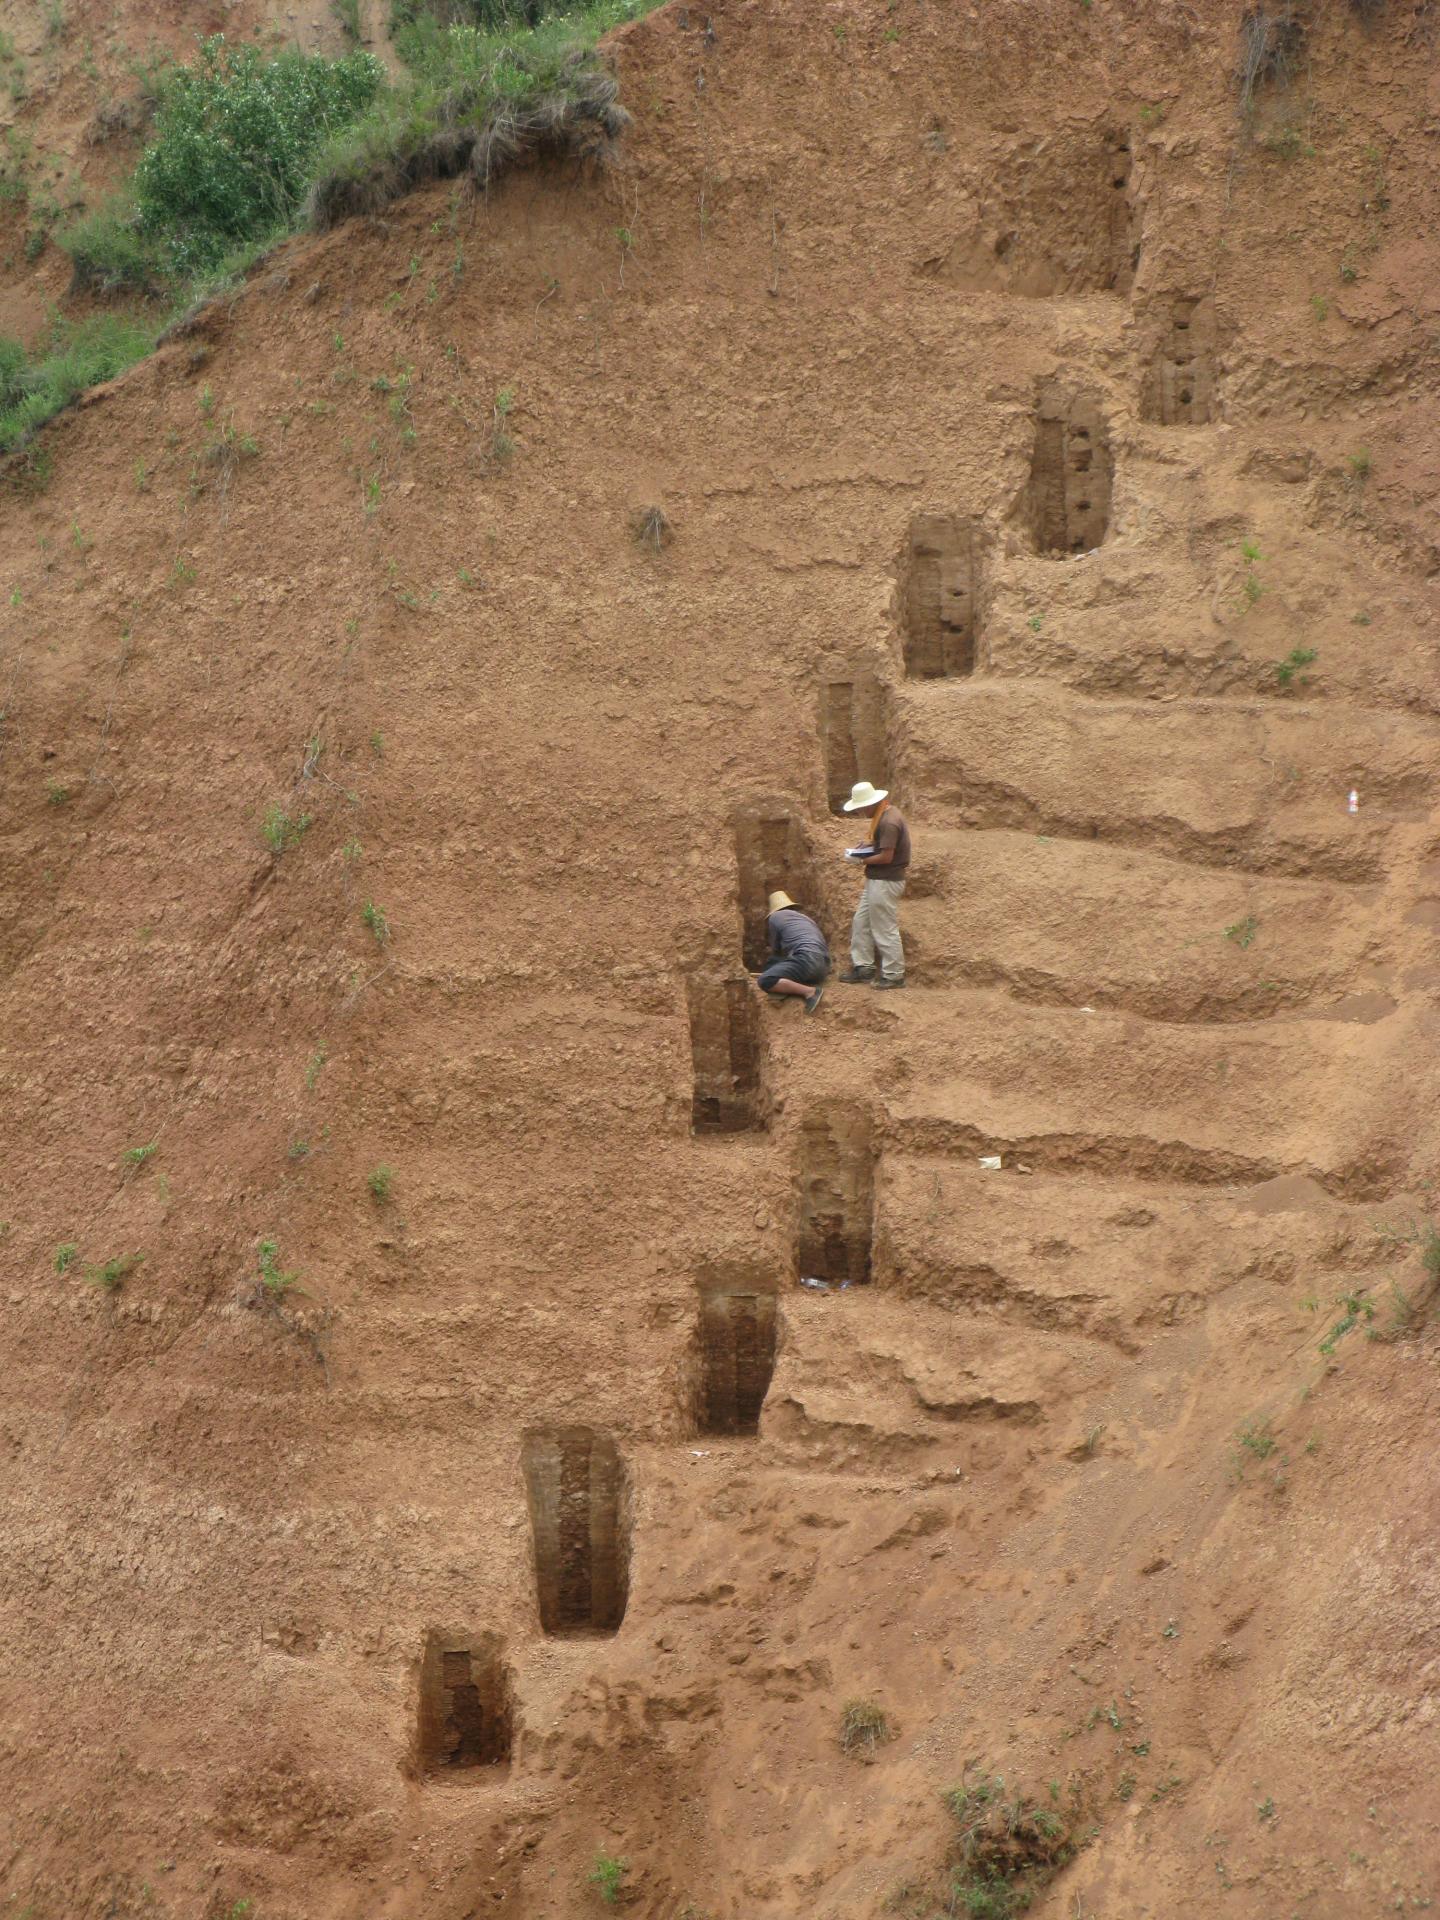 Researchers Collect Soil Samples Near Xi'an, China